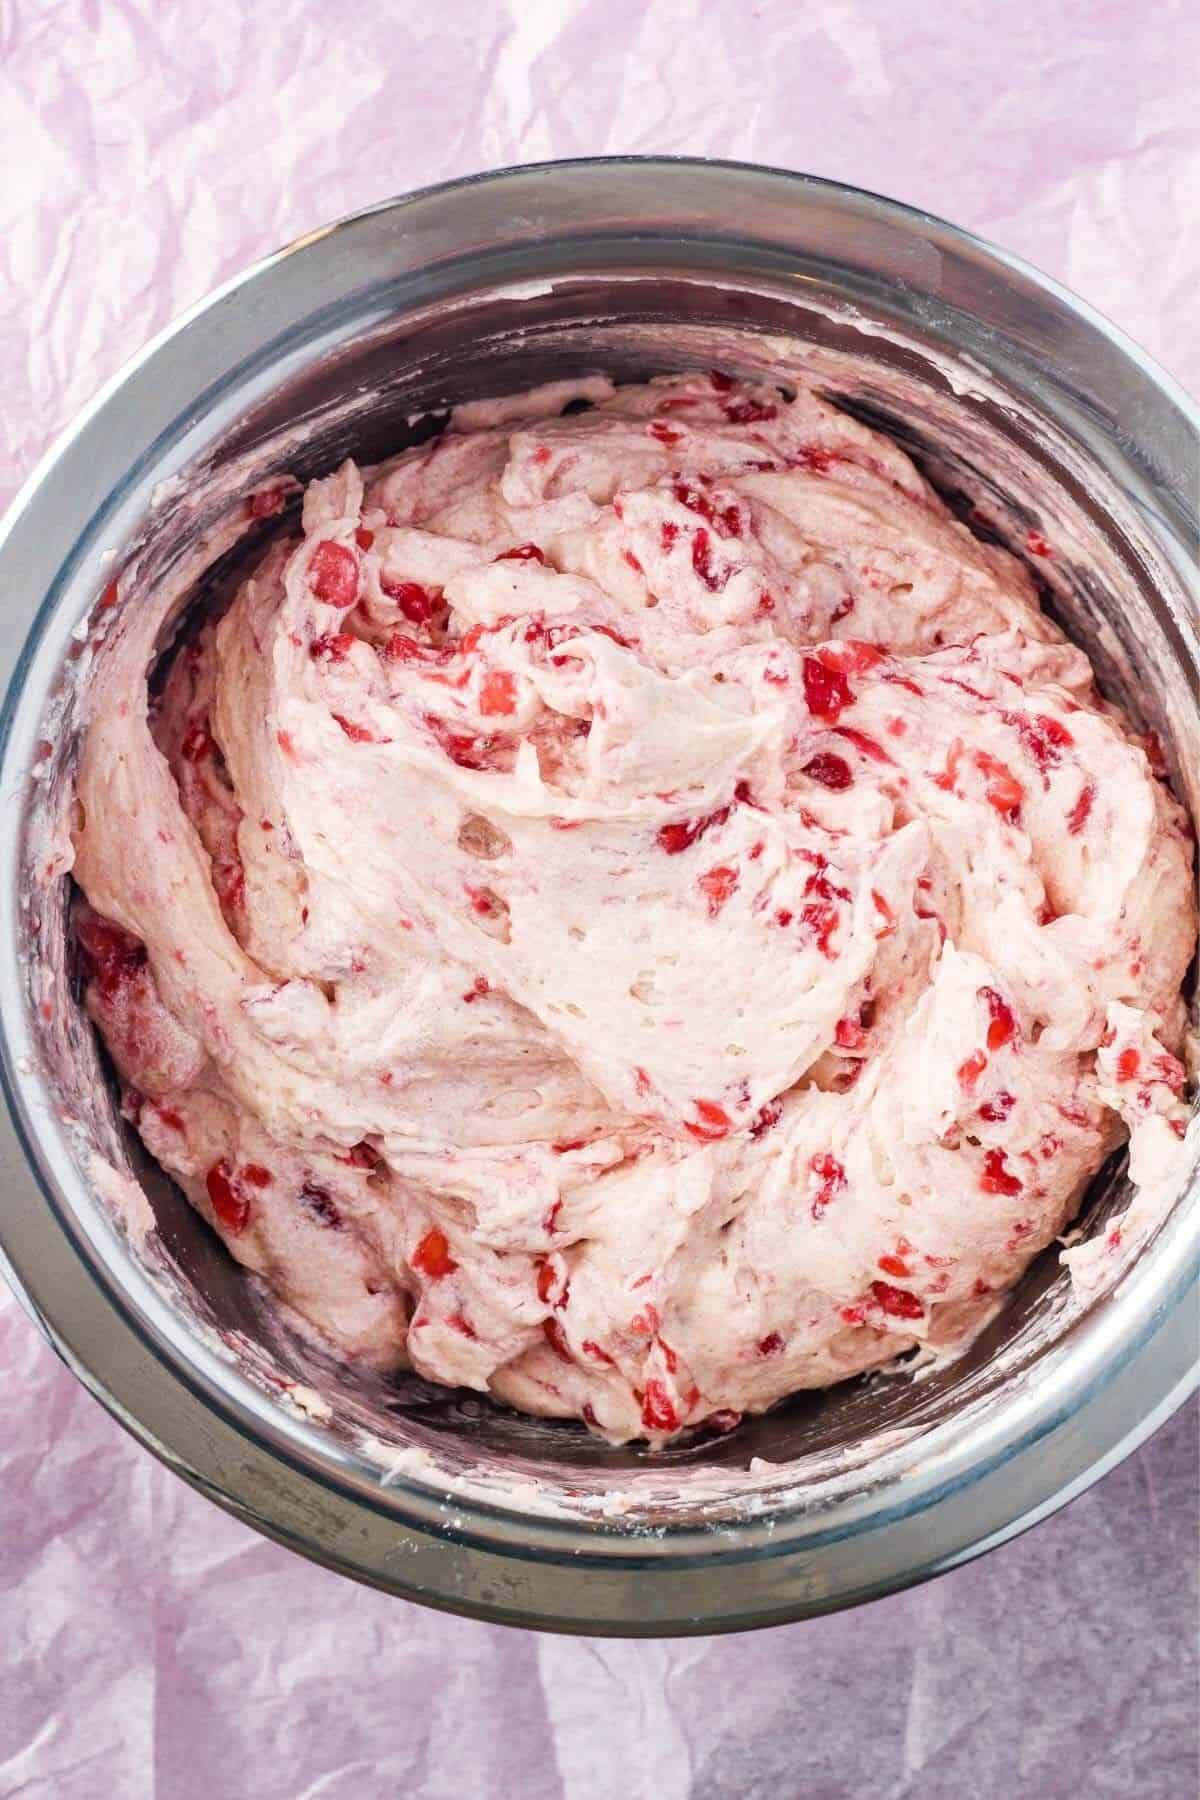 Strawberry cake batter in a bowl.